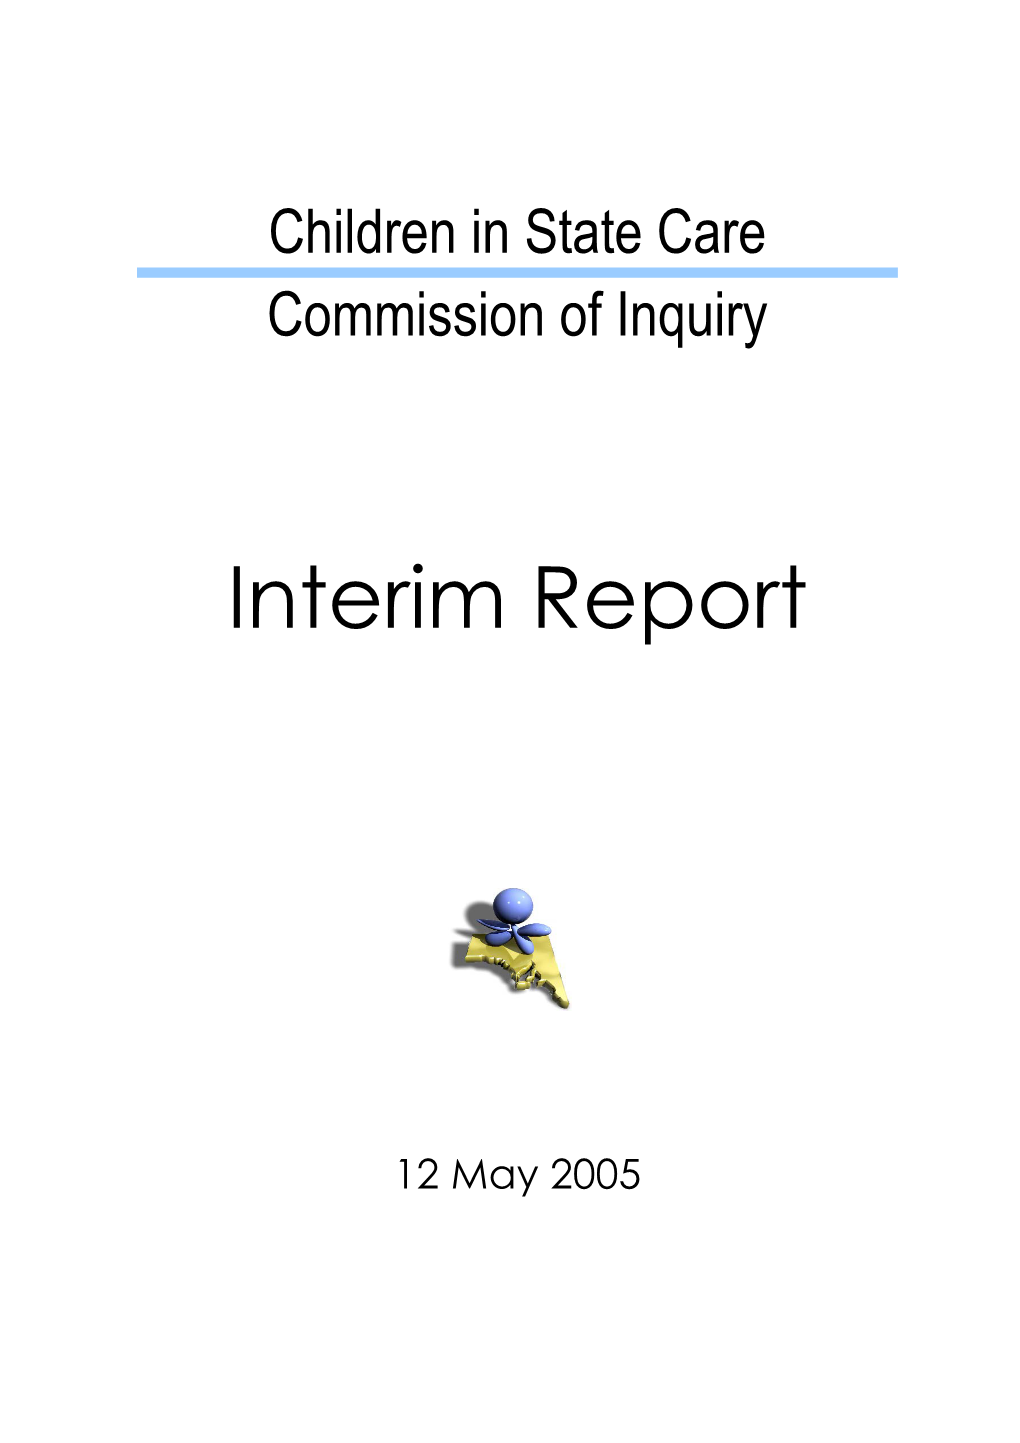 First Report of the Children in State Care Commission of Inquiry